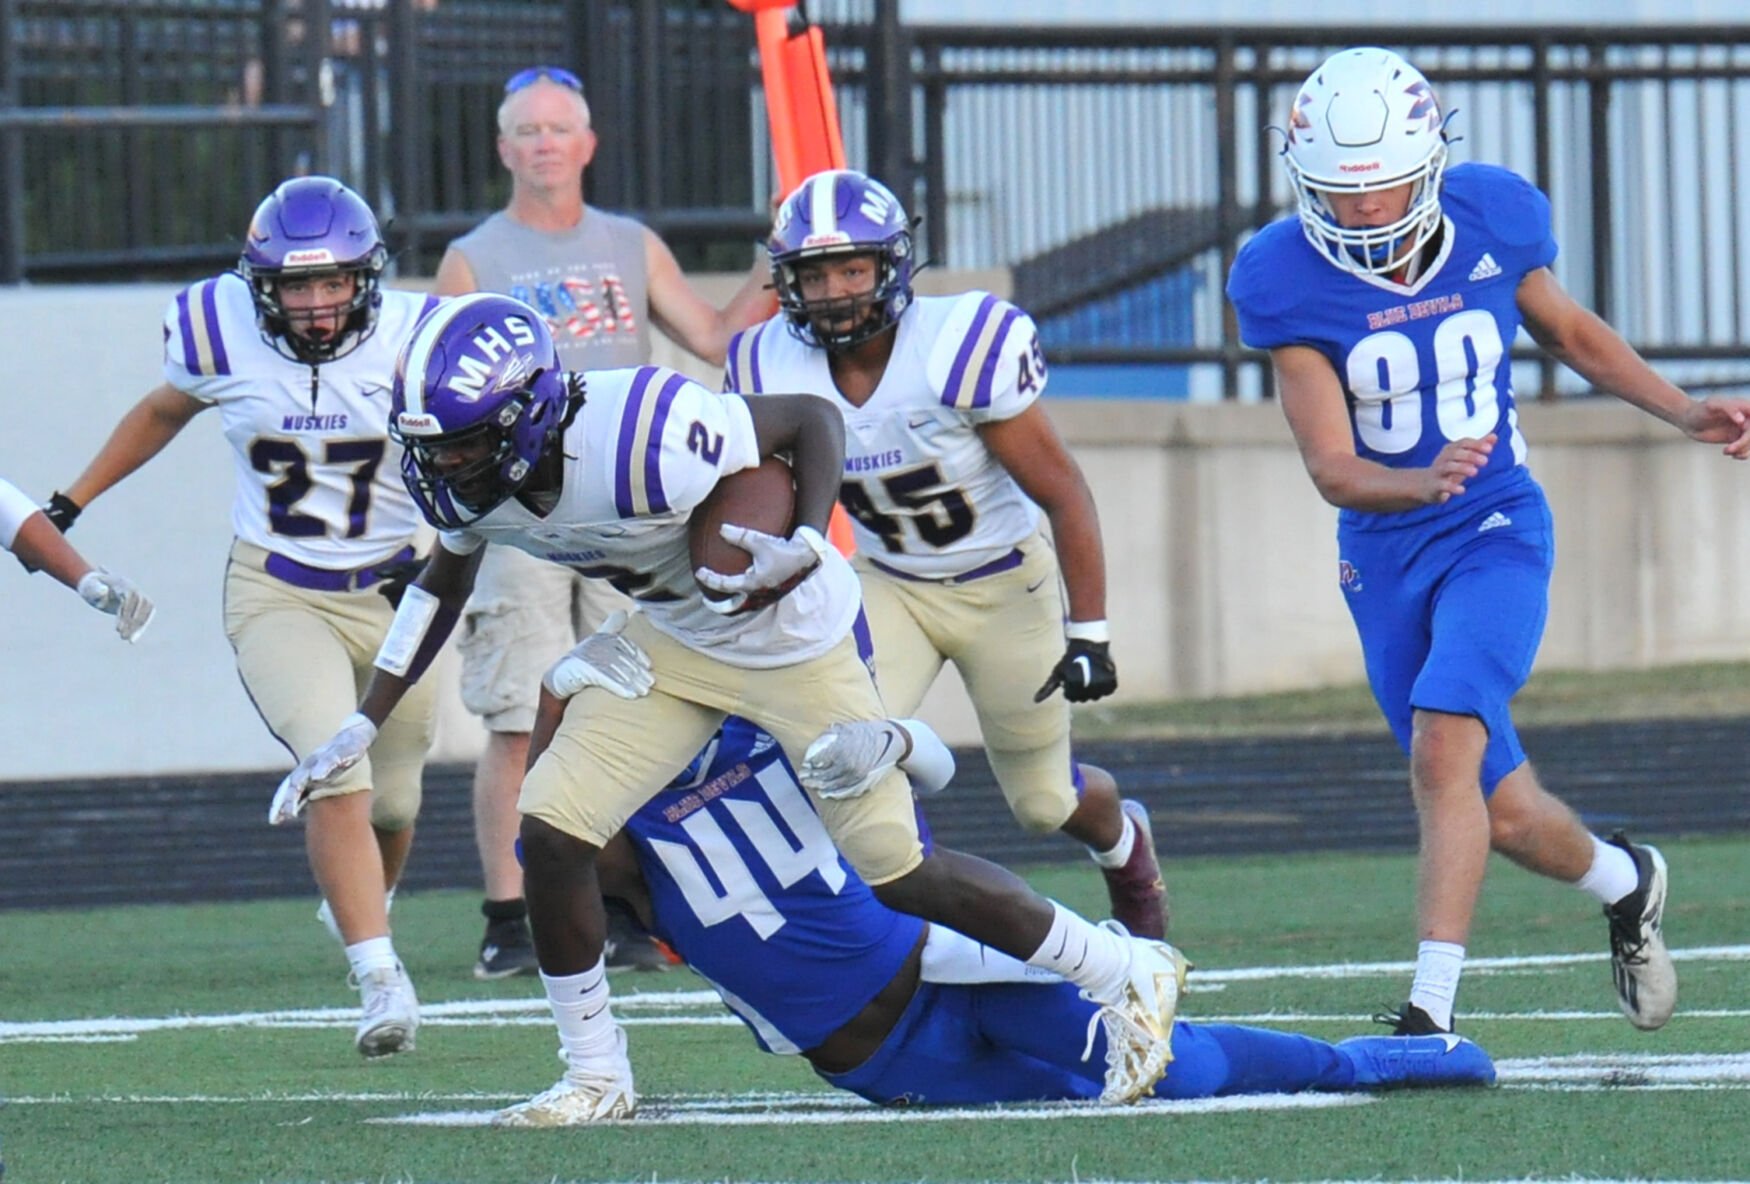 Muscatine Muskies edge out Davenport Central Blue Devils in thrilling 14-13 victory